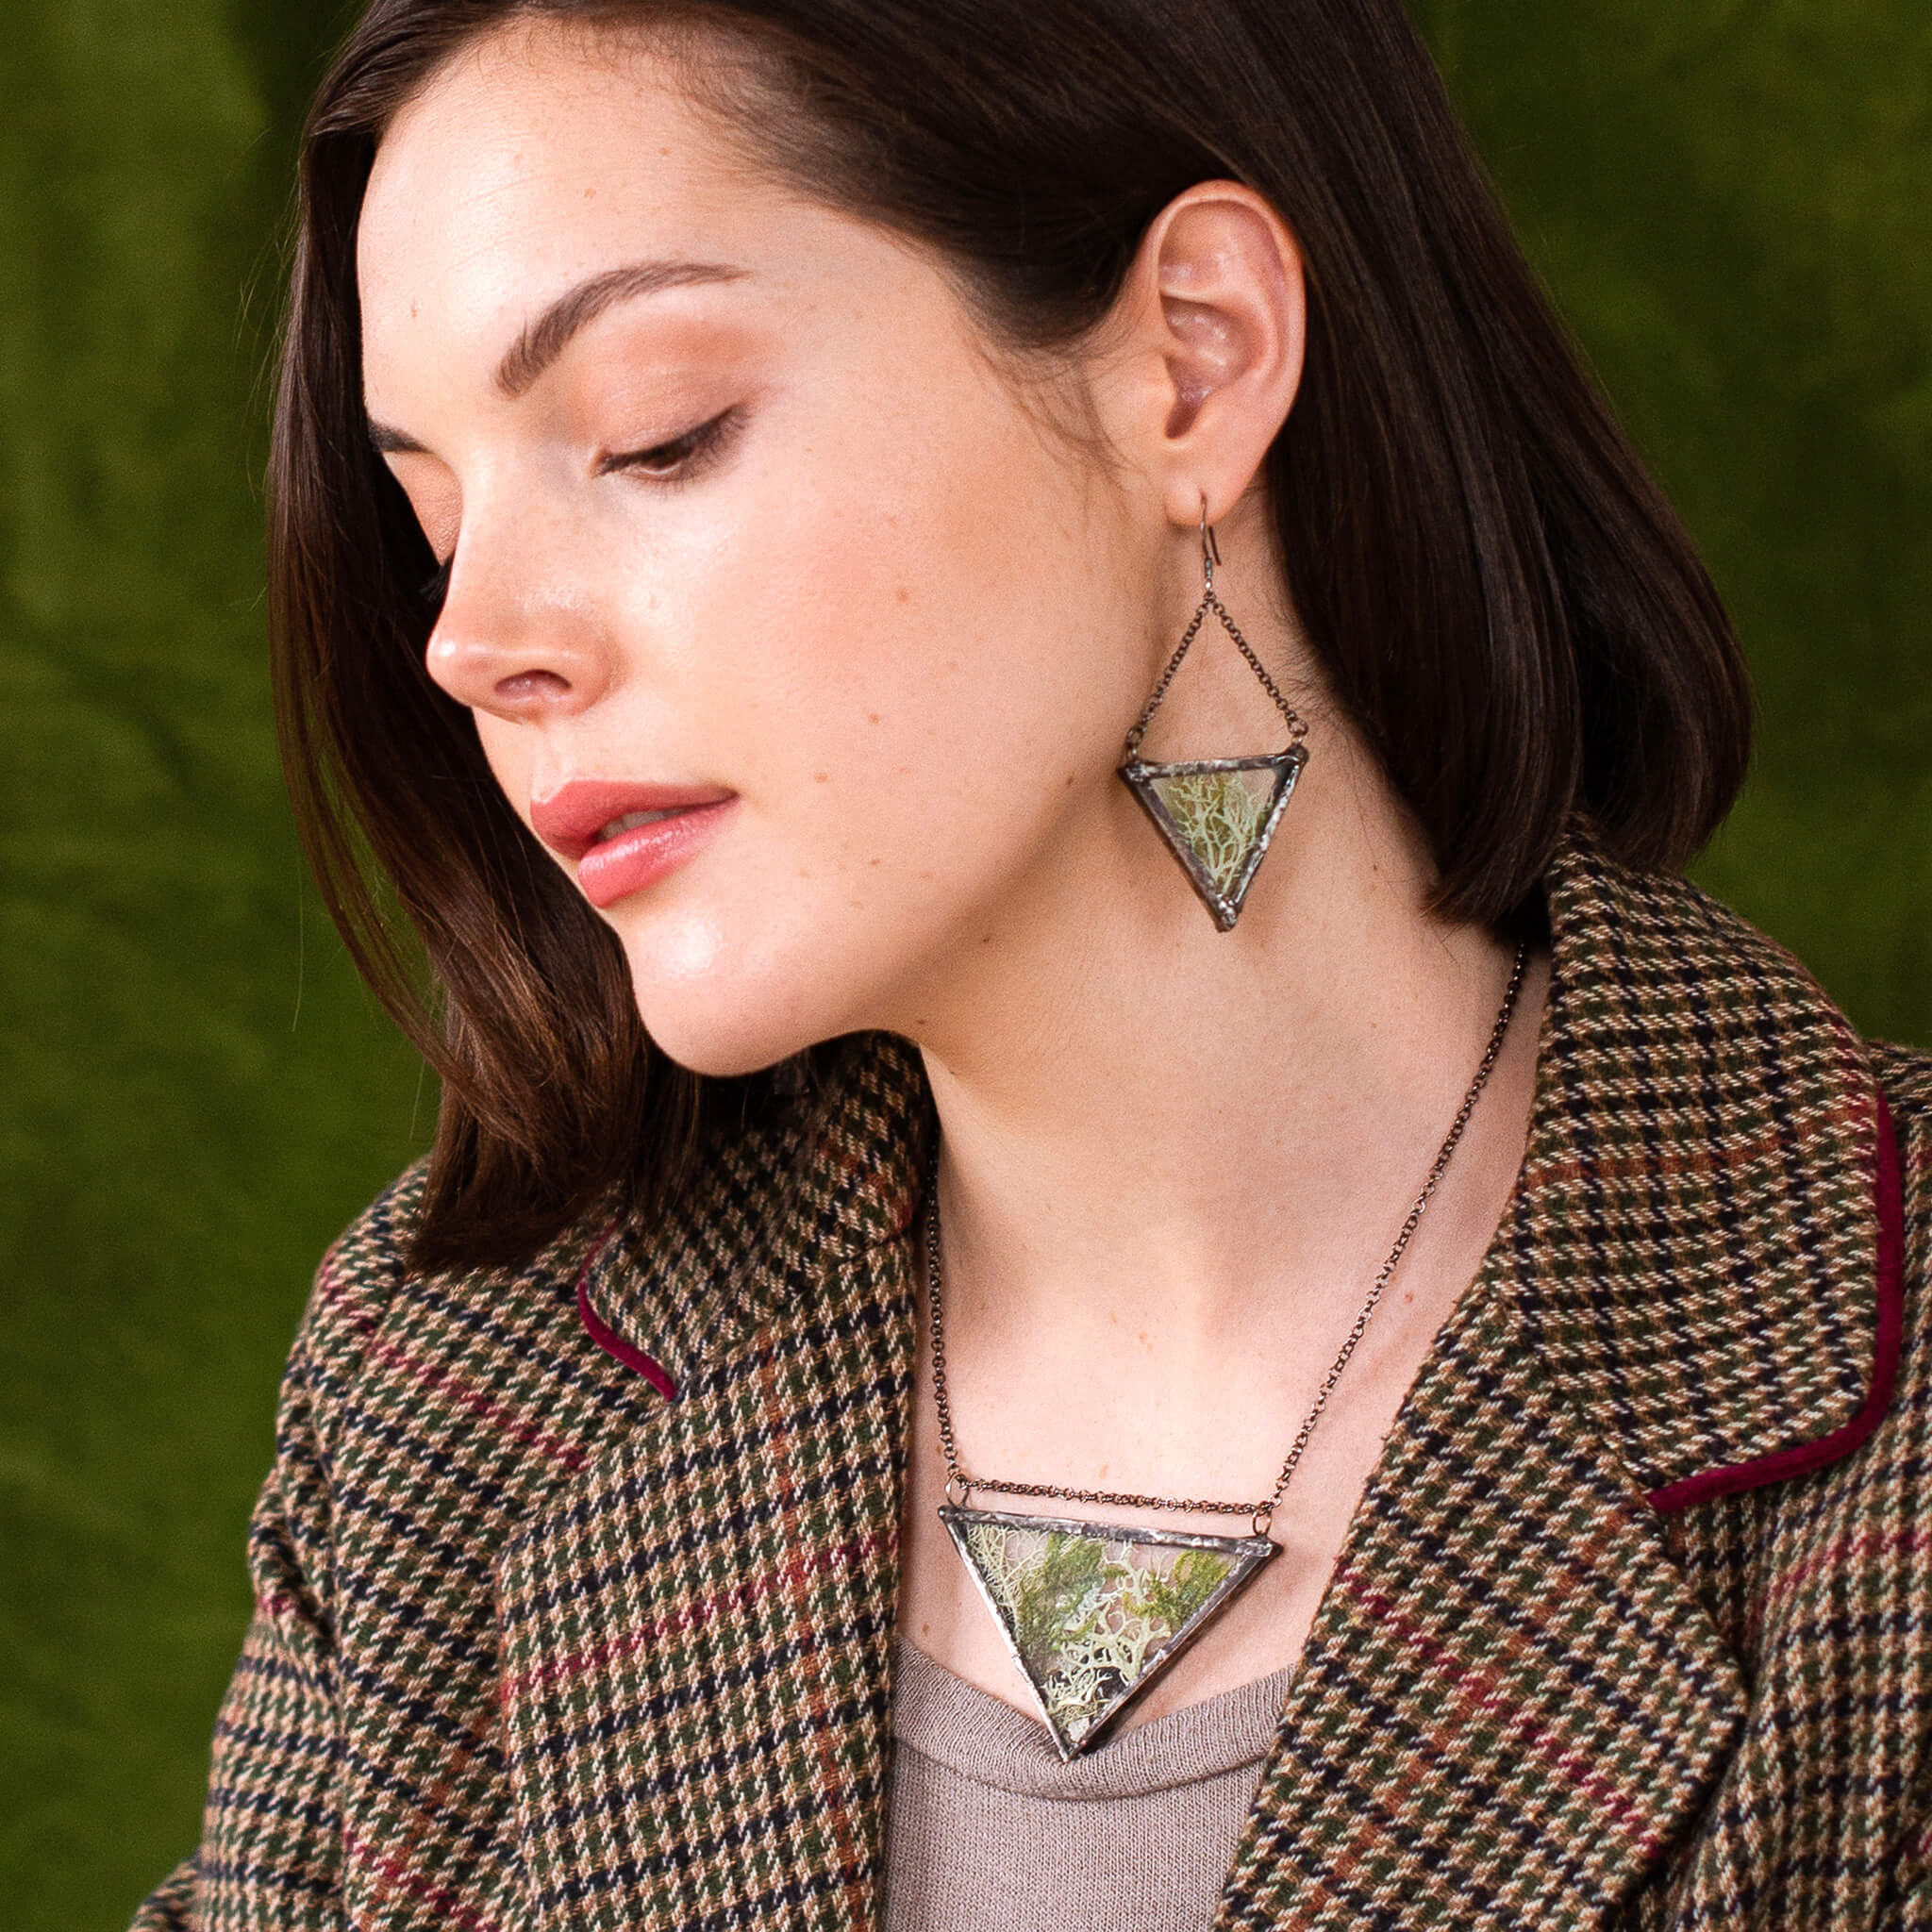 Woman wearing Triangular pressed moss earrings and necklace